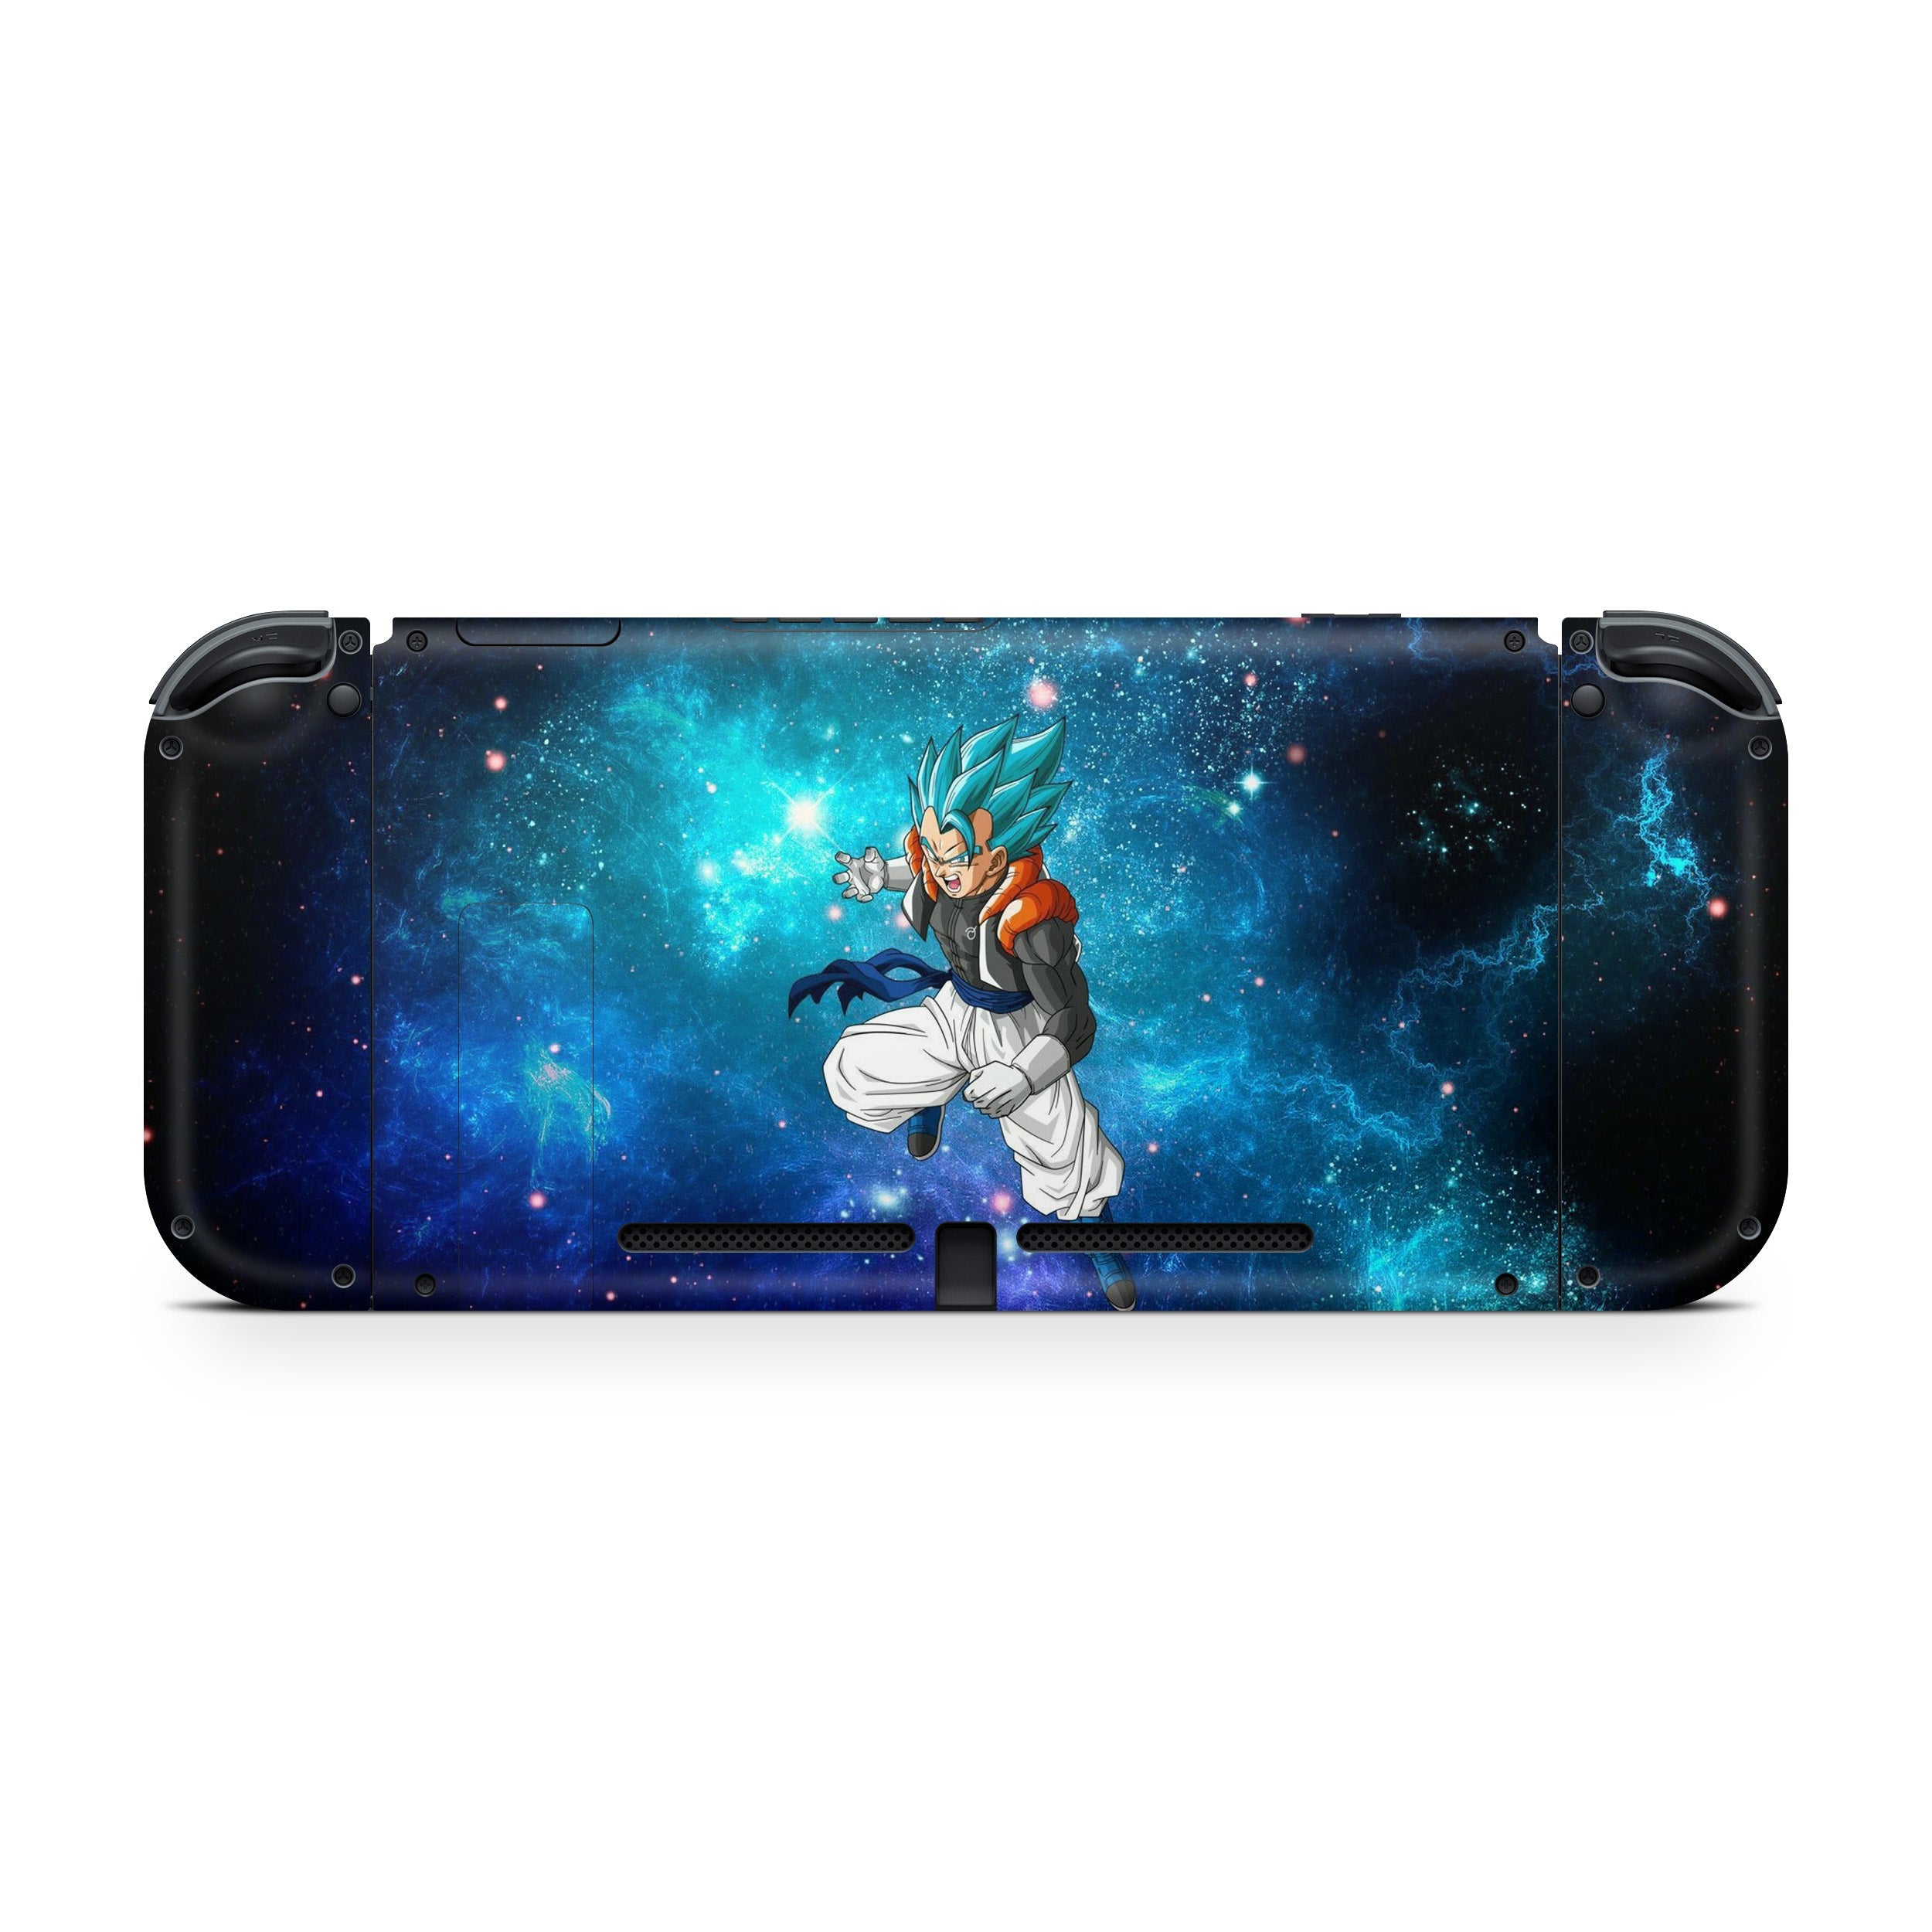 A video game skin featuring a Dragon Ball Super Gogeta design for the Nintendo Switch.